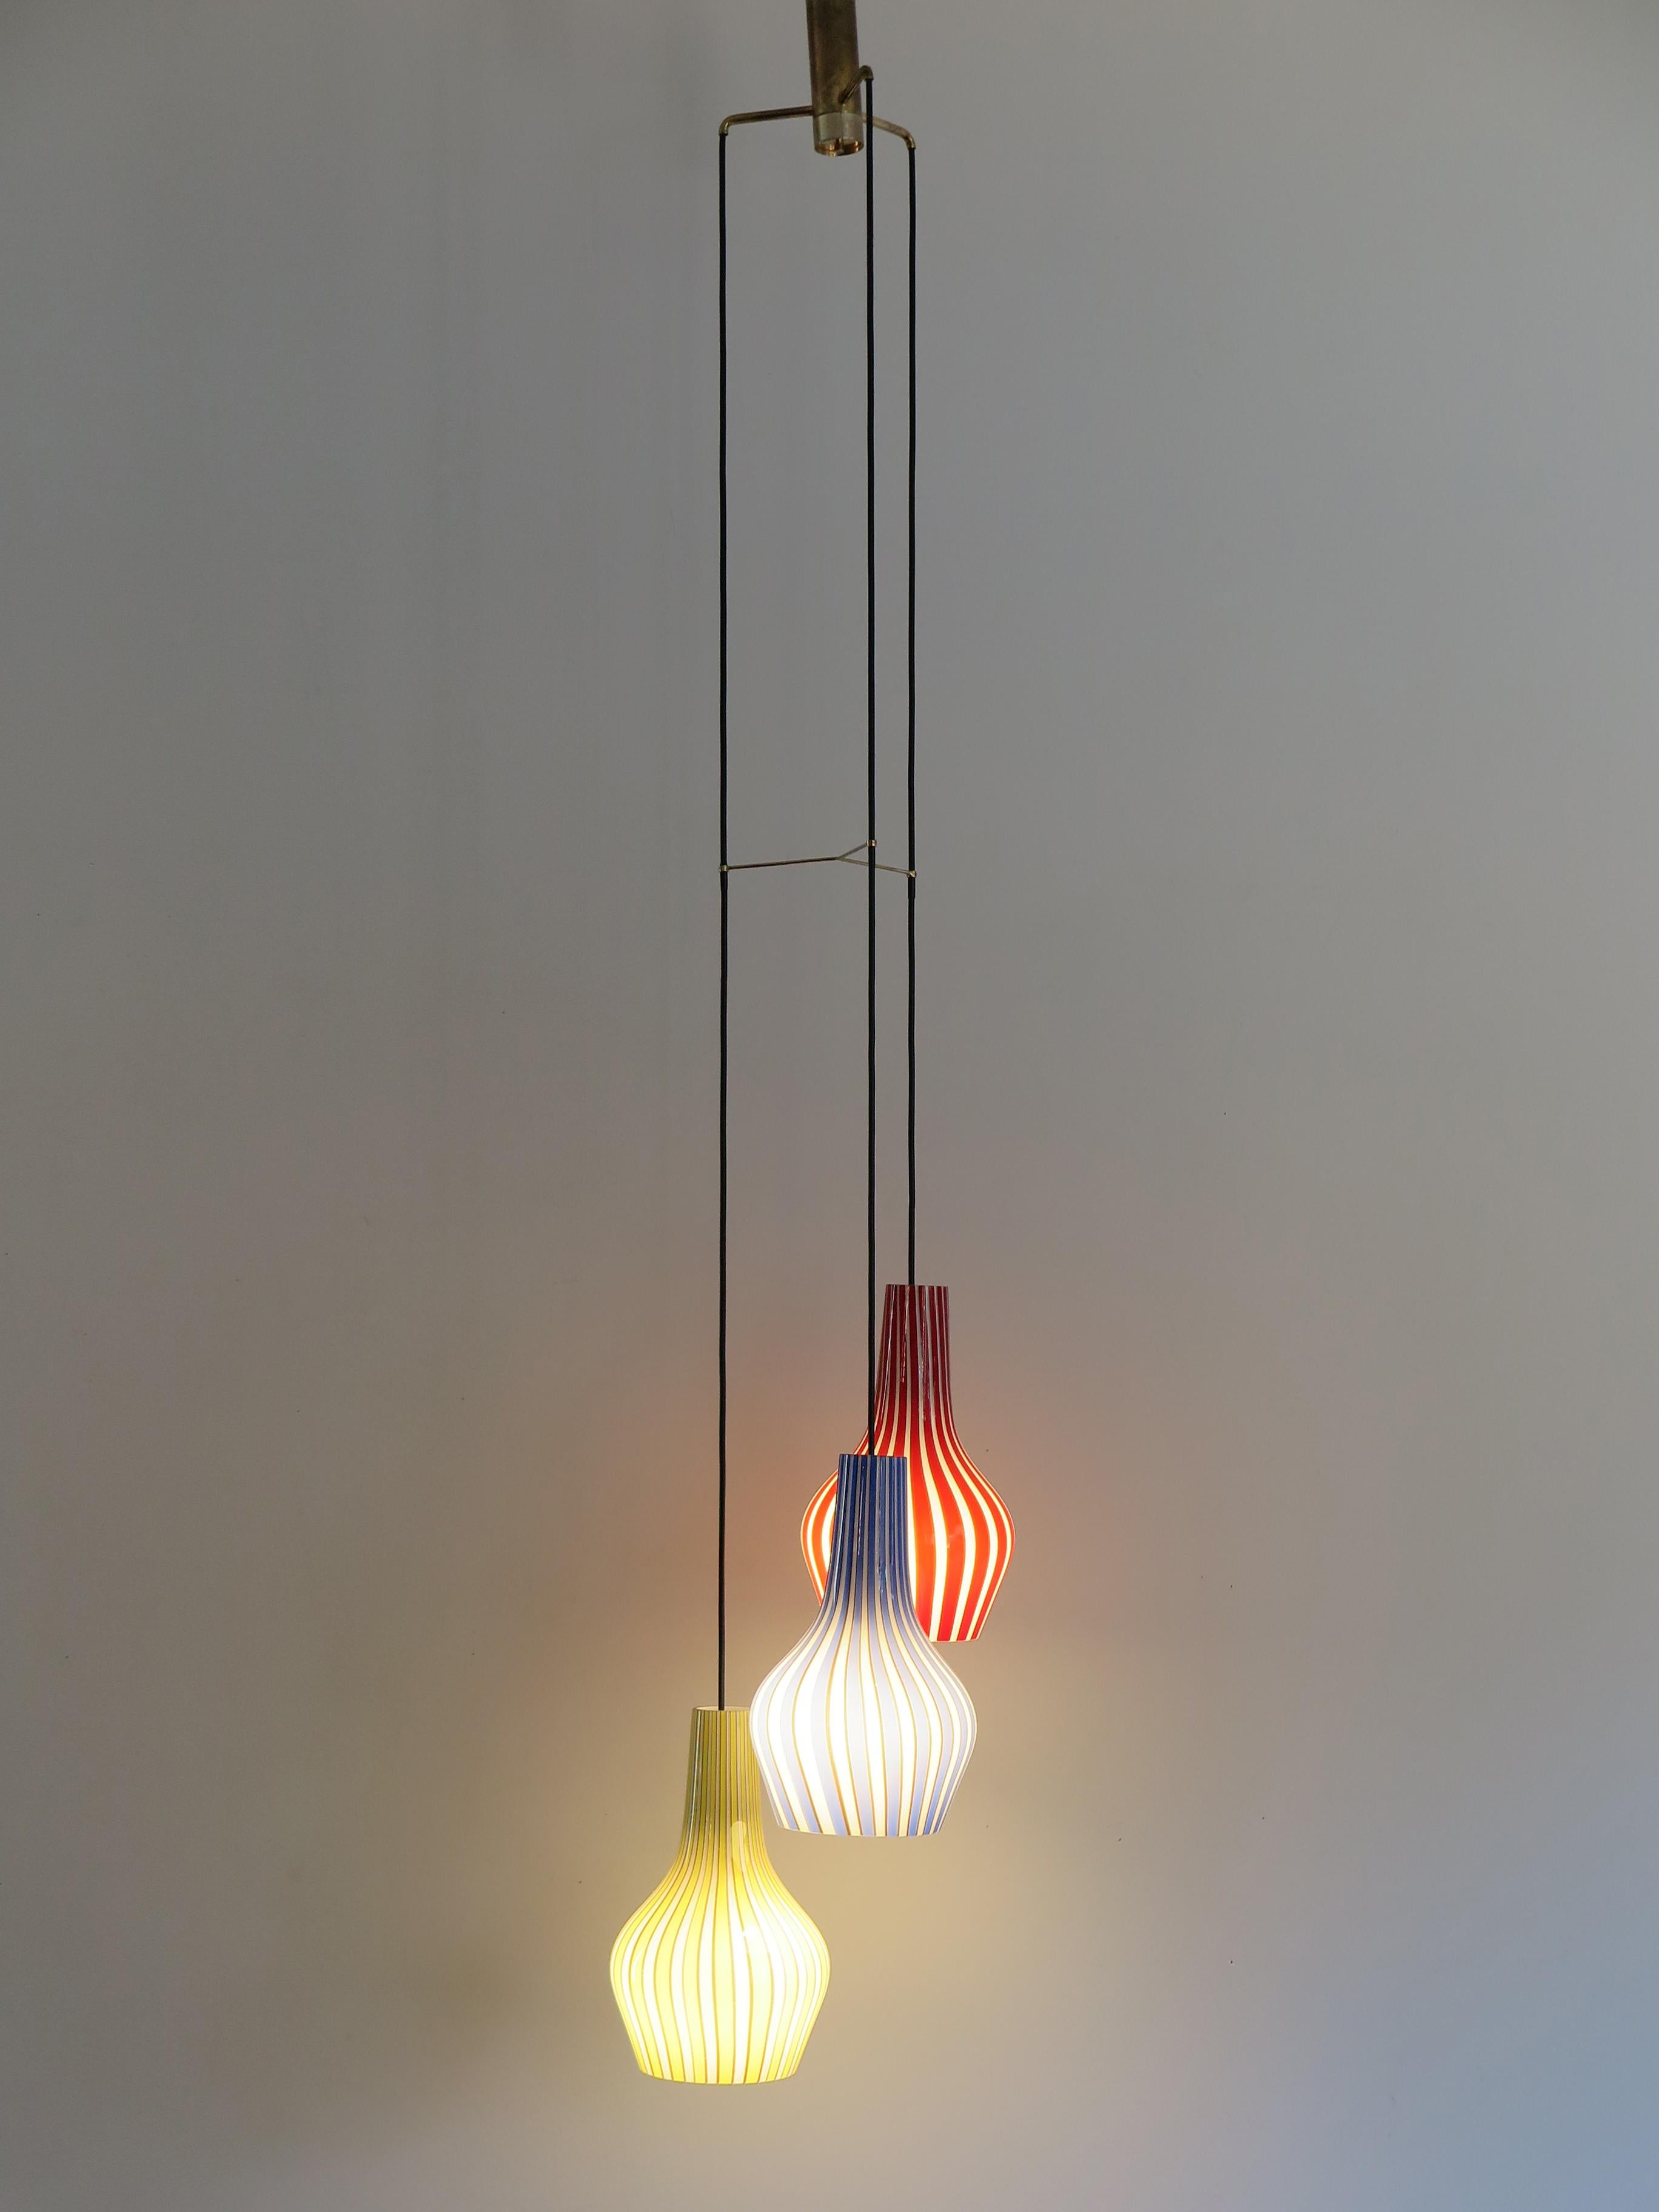 Amazing and very rare Italian glass pendant lamp designed by Flavio Poli for Seguso Vetri d'Arte ‘Art glass’ with red, yellow and blue lined striped glass diffusers and with inner white casing, brass details, 1950s
29th Venice Biennale.

Please note